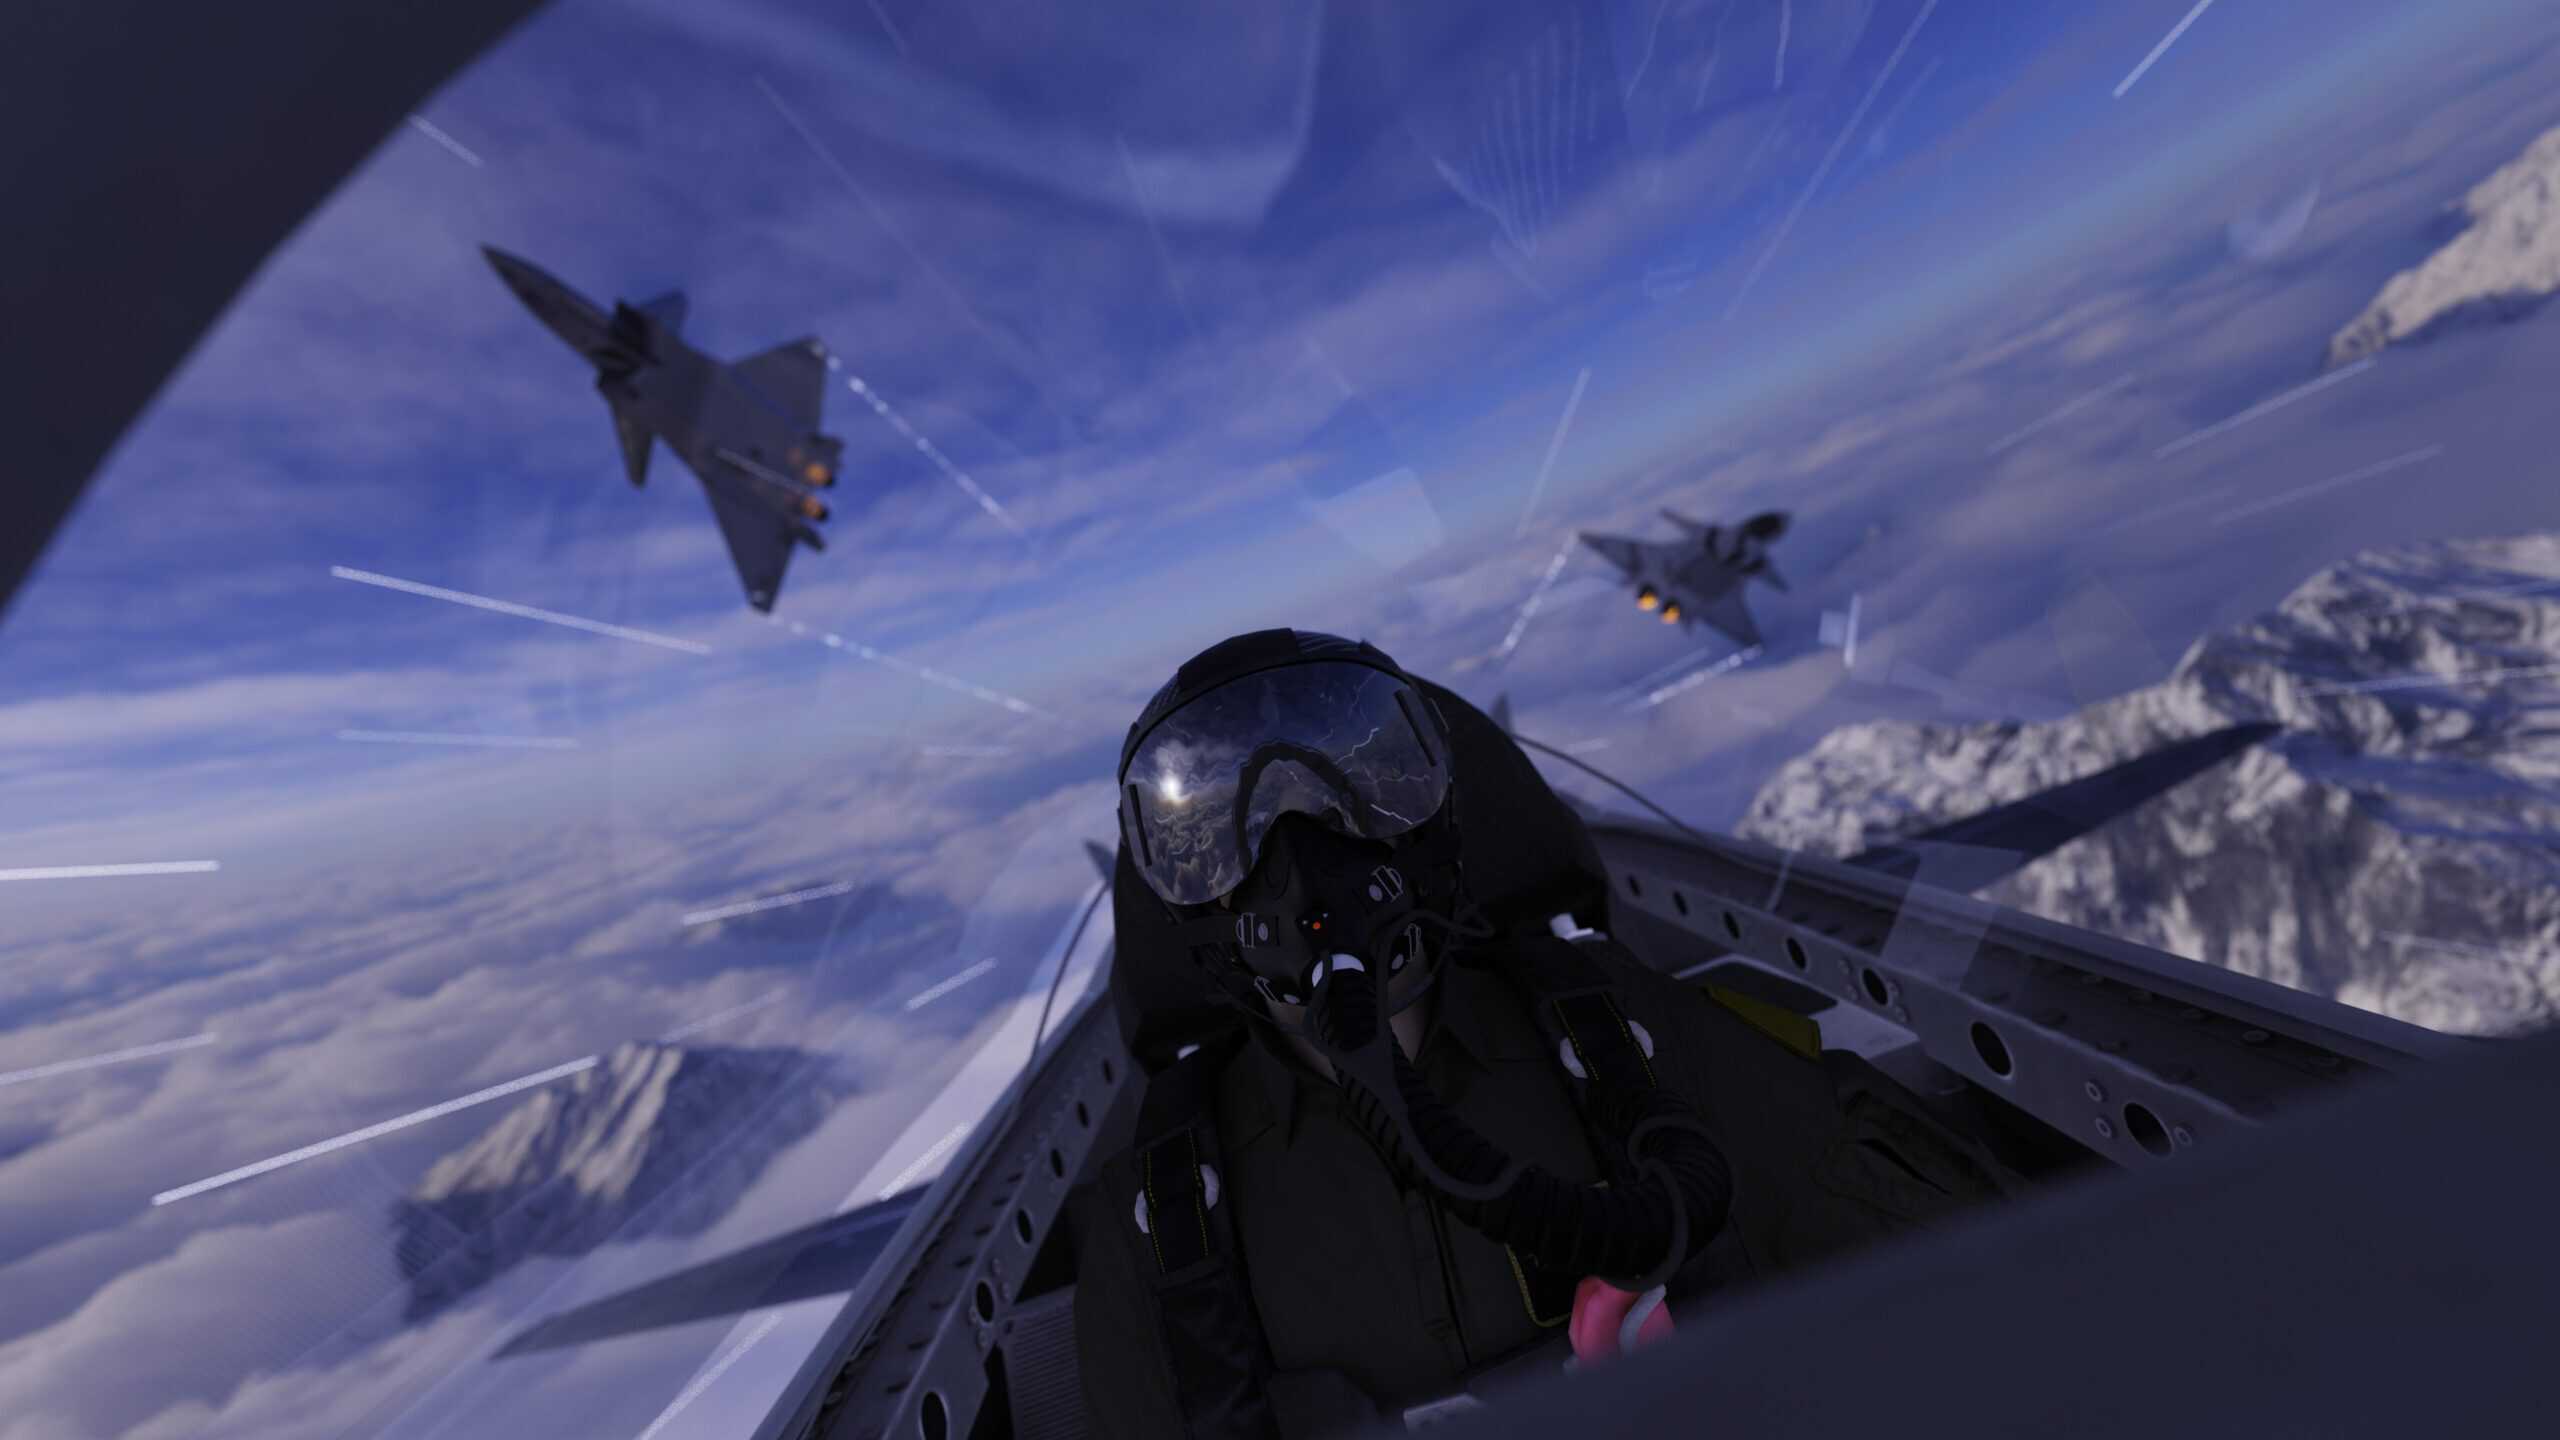 Air Force: Captain | Two chinese jet flying over pilot in cockpit 3d render dogfight scene